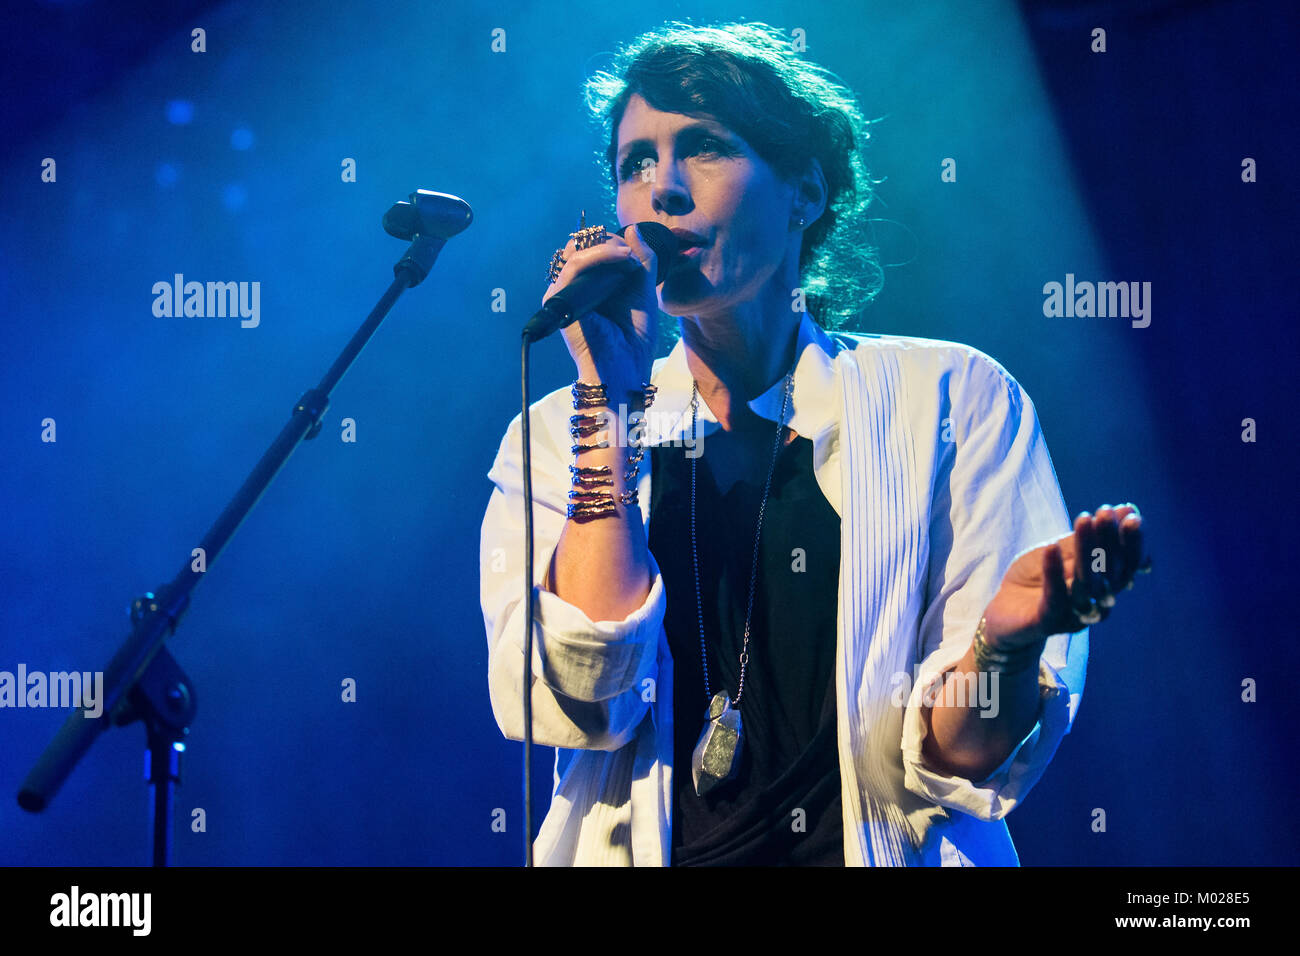 The Norwegian singer, songwriter and musician Kari Bremnes performs a live  concert at Parkteatret in Oslo. Norway, 06/11 2013 Stock Photo - Alamy